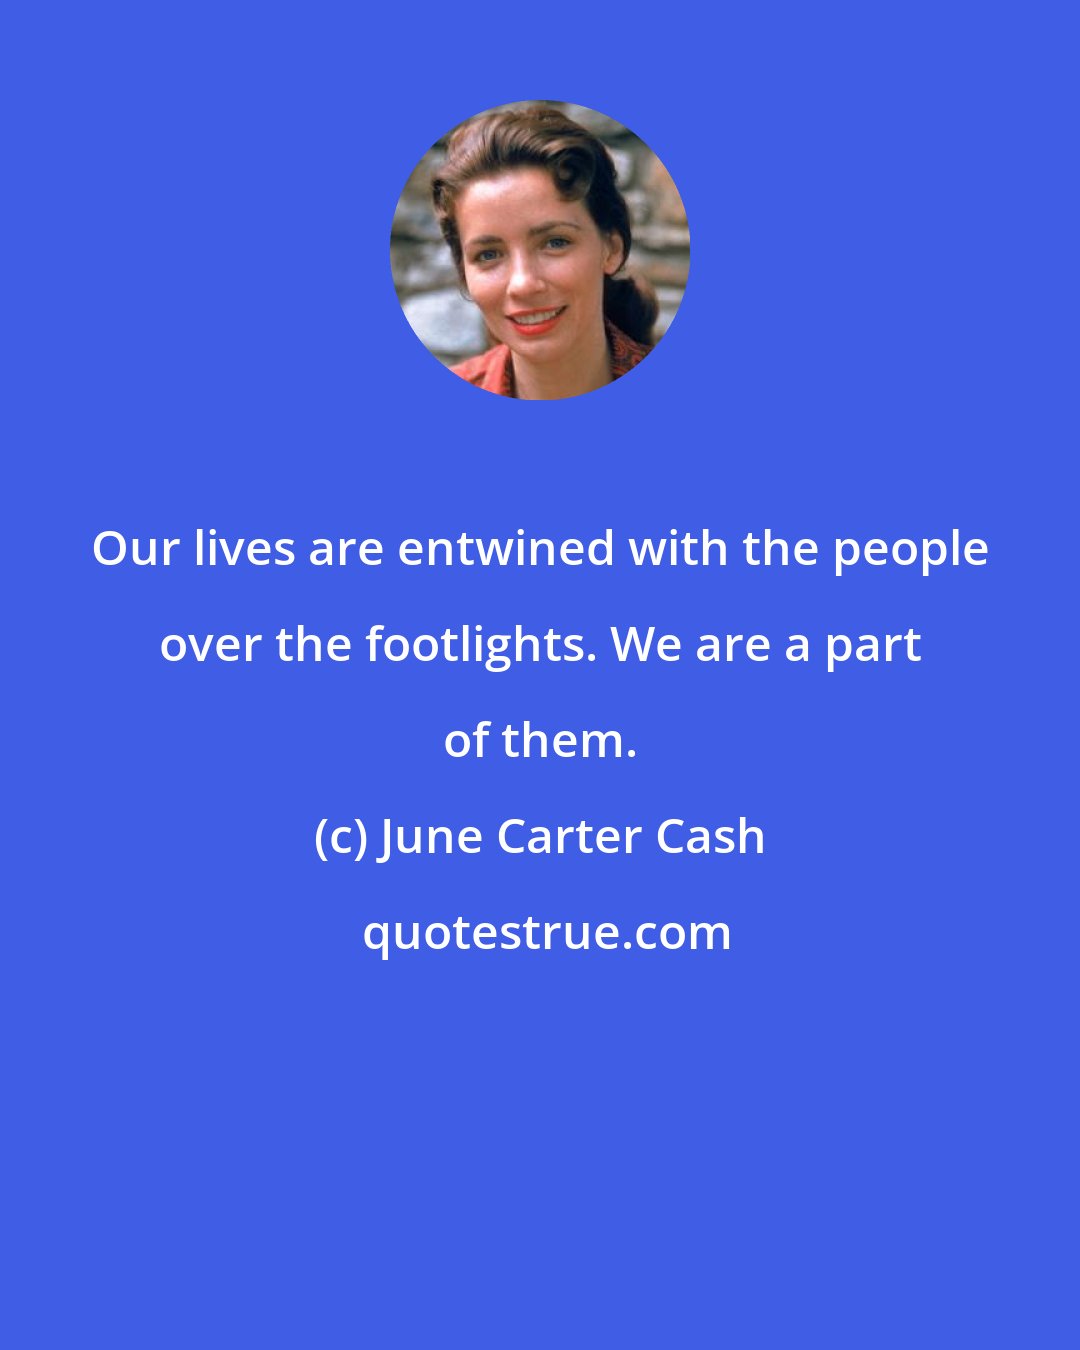 June Carter Cash: Our lives are entwined with the people over the footlights. We are a part of them.